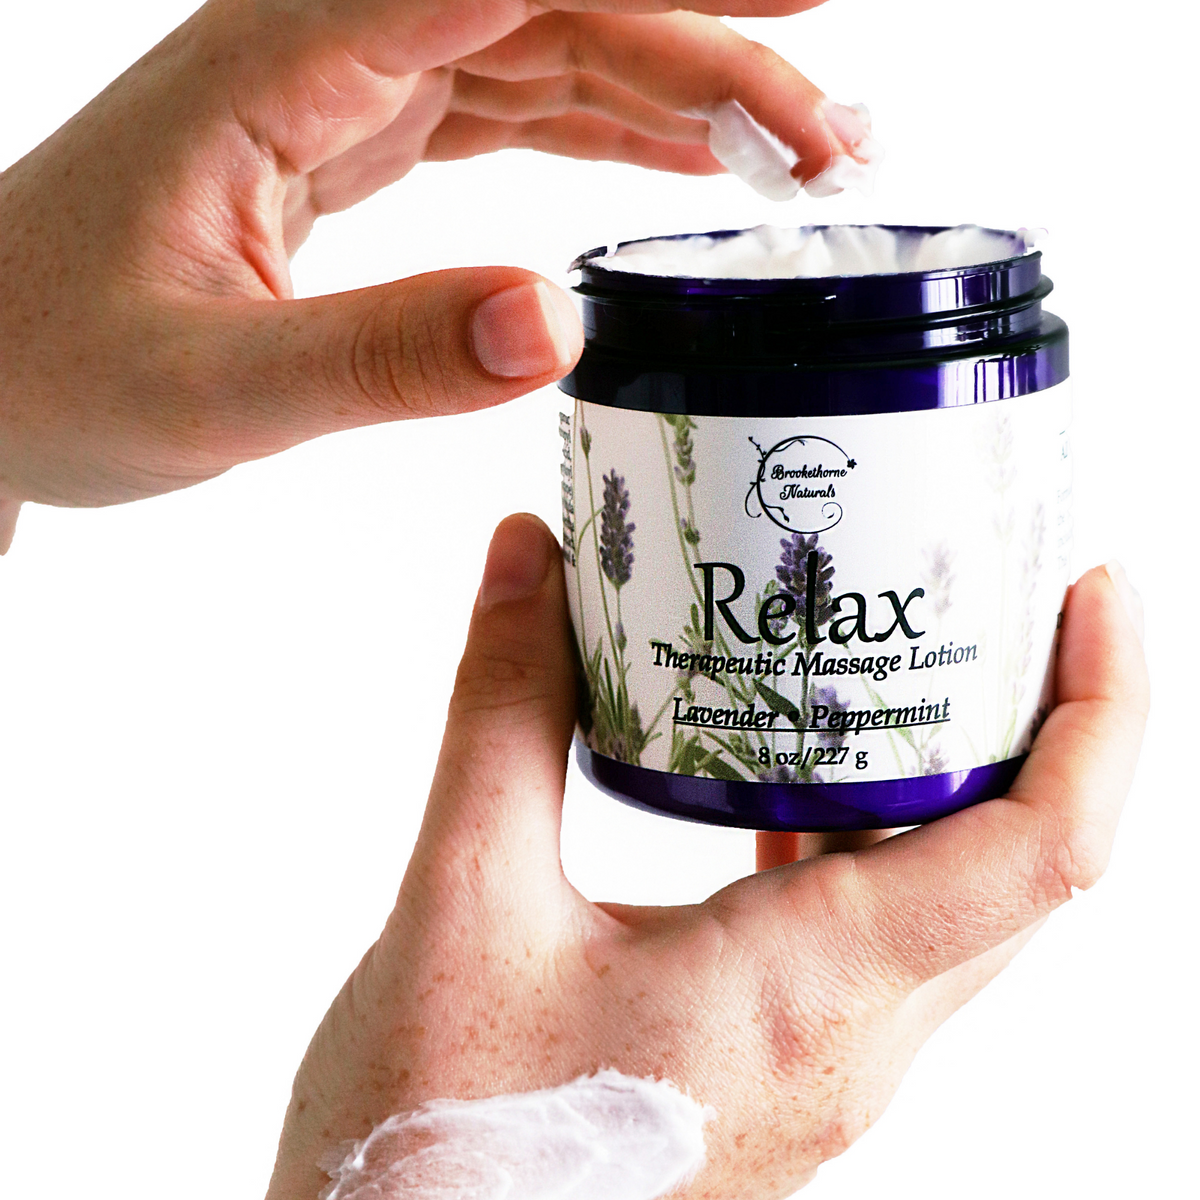 Relax Therapeutic Massage Lotion being applied to a hand